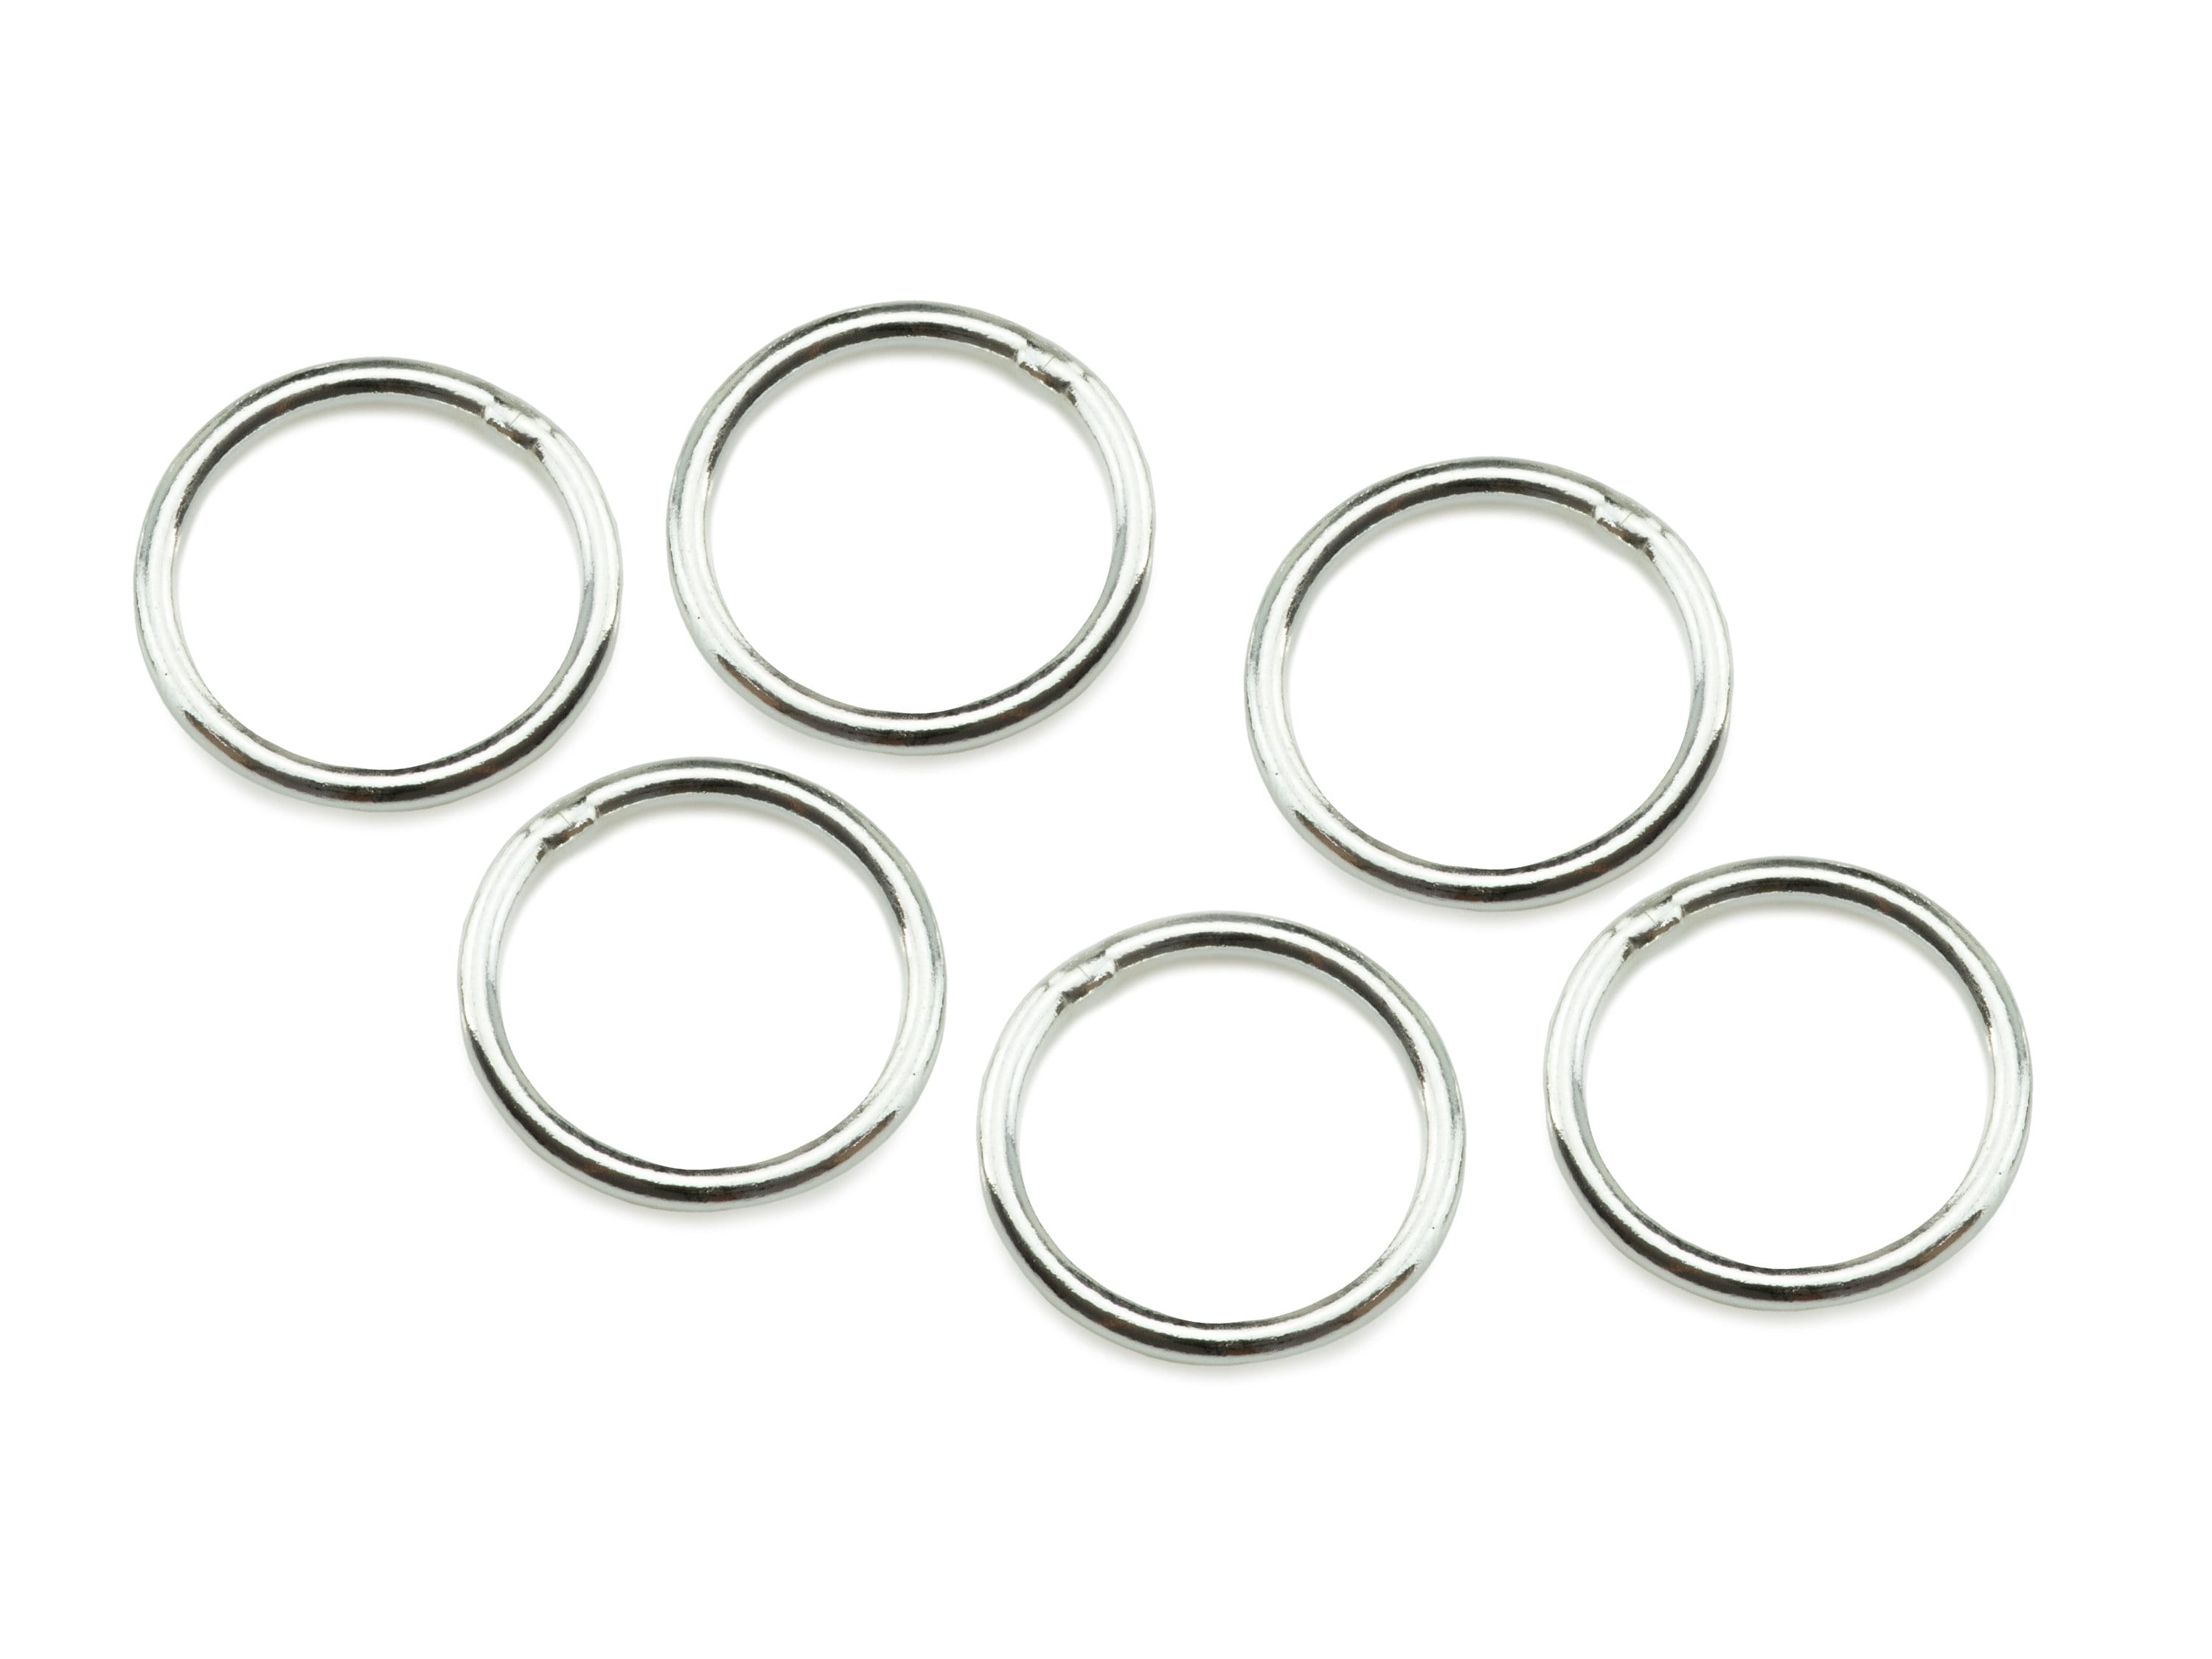 Buy Jewelry Findings Kit Assorted Open Jumpring Jump Rings For